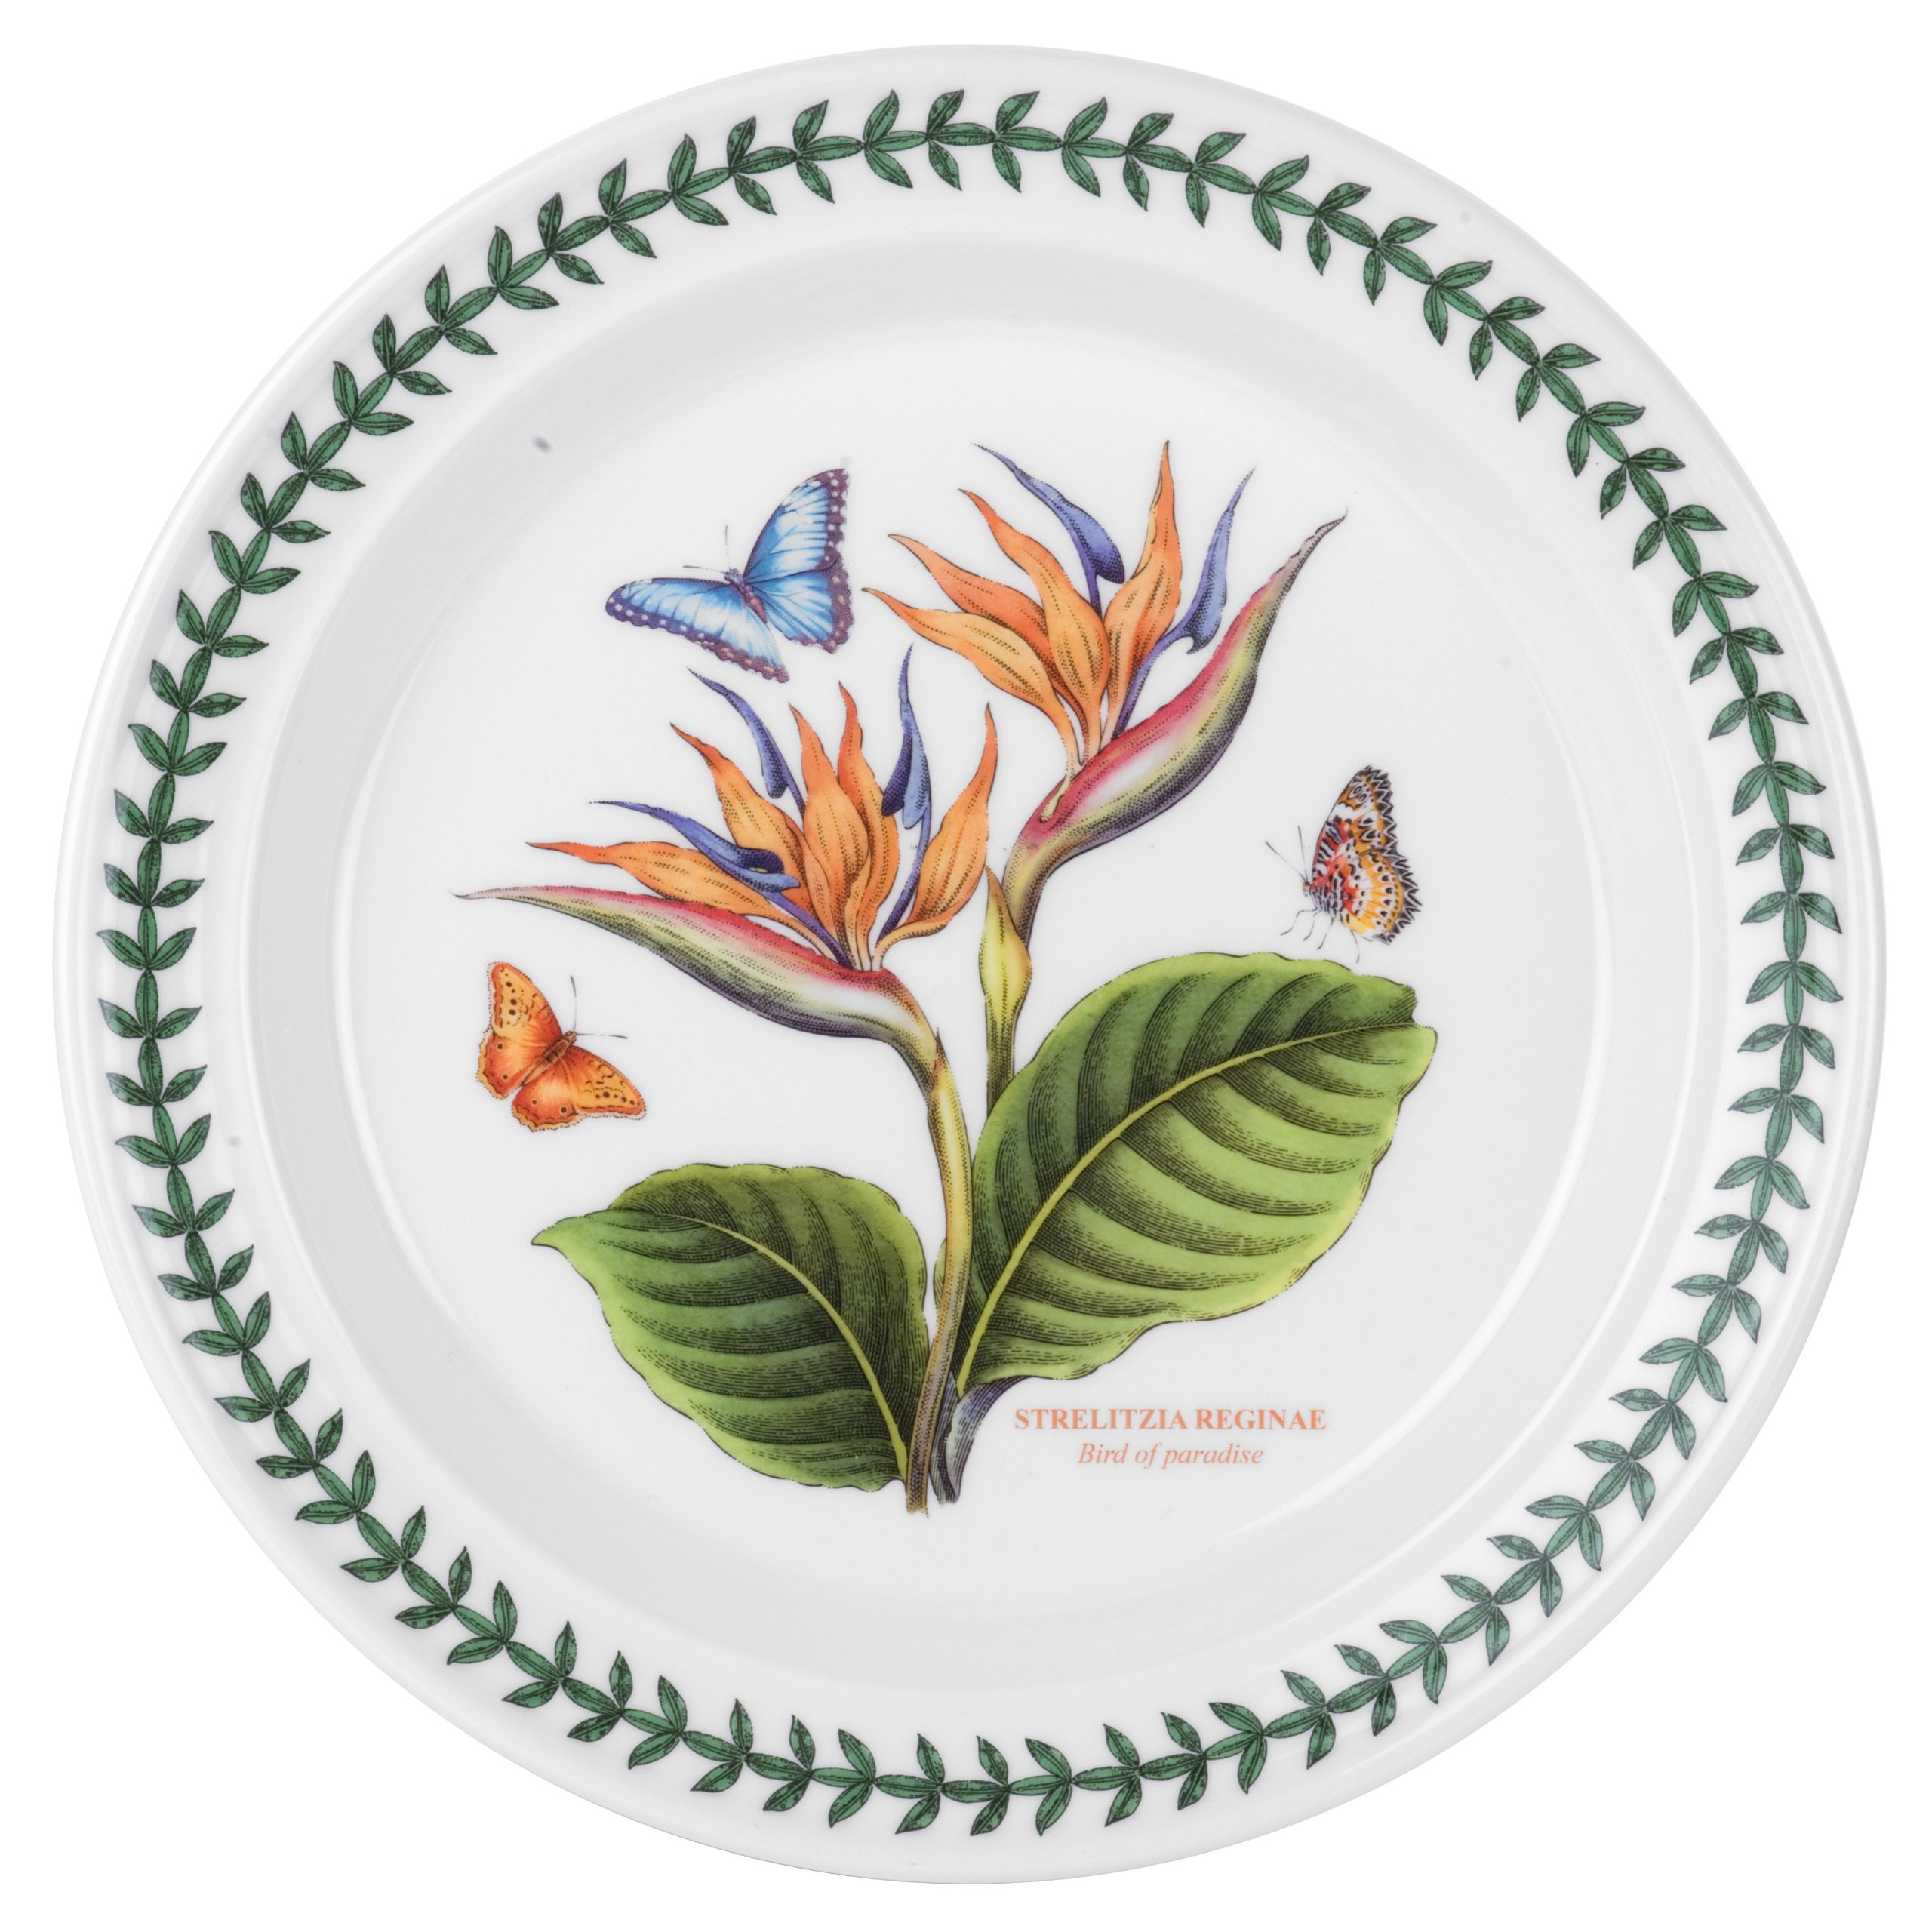 Portmeirion Exotic Botanic Garden Dinner Plate with Assorted Motifs, Round, Ceramic, Dishwasher, Microwave, & Oven Safe, 10.5 Inch, Made in England - Set of 6